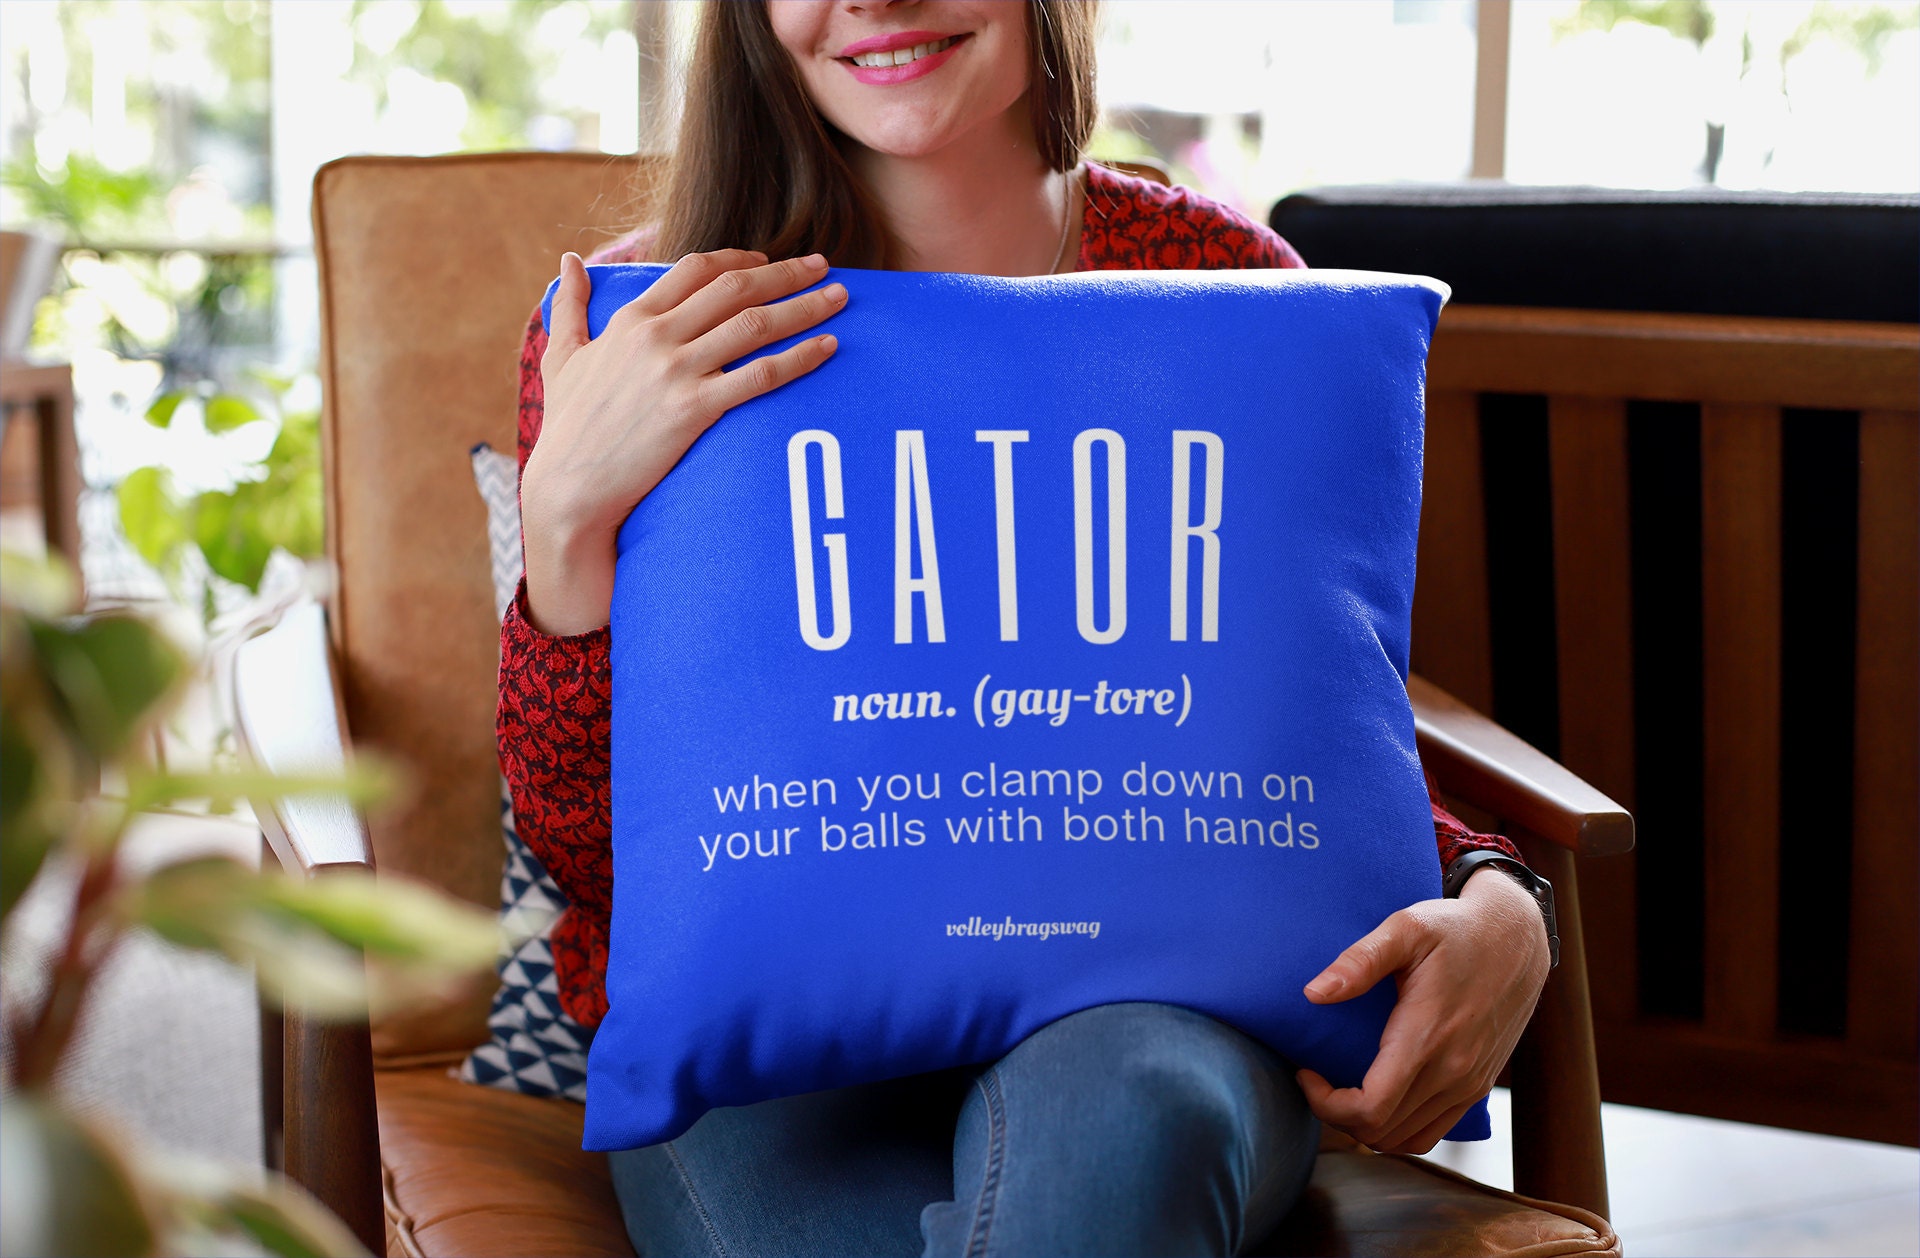 gator - when you clamp down on your balls with both hands volleyball shirt. April Chapple, Launches a Hilarious Volleyball T-shirt Line With Fun Tongue-in-Cheek Designs sure to make players and enthusiasts laugh available on Etsy and Amazon in time for Cyber Monday and Christmas. The gator dig is used by advanced beach players who will hold the heels of their hands together to form the shape of an alligators mouth to dig a hard driven hit back up into the air for their partner to make a play with.